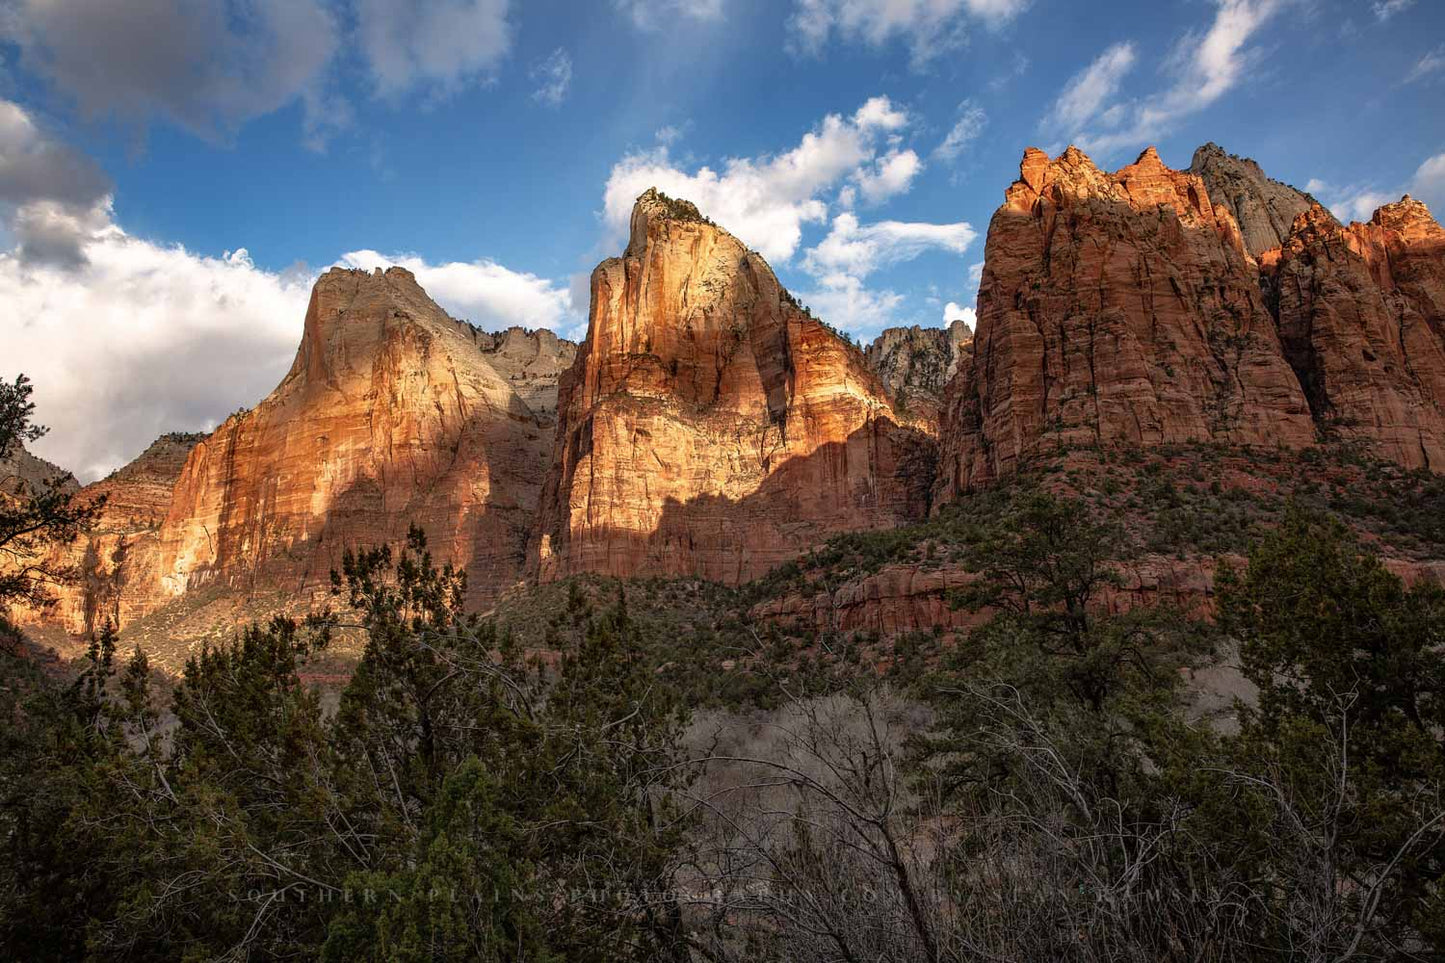 Sunlight breaks through clouds and shines on the Three Patriarchs in Zion National Park, Utah by Sean Ramsey of Southern Plains Photography.